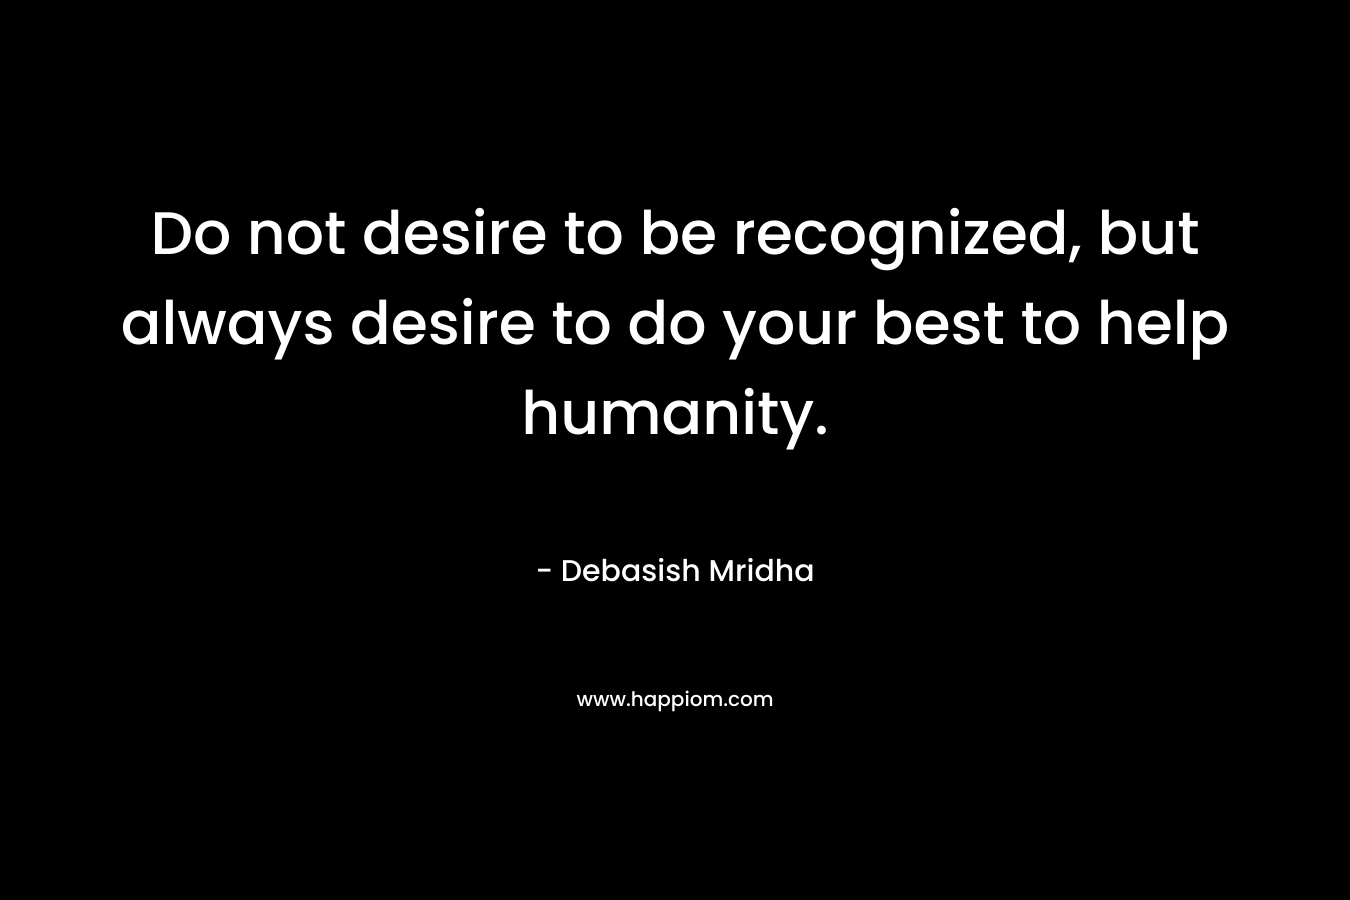 Do not desire to be recognized, but always desire to do your best to help humanity.